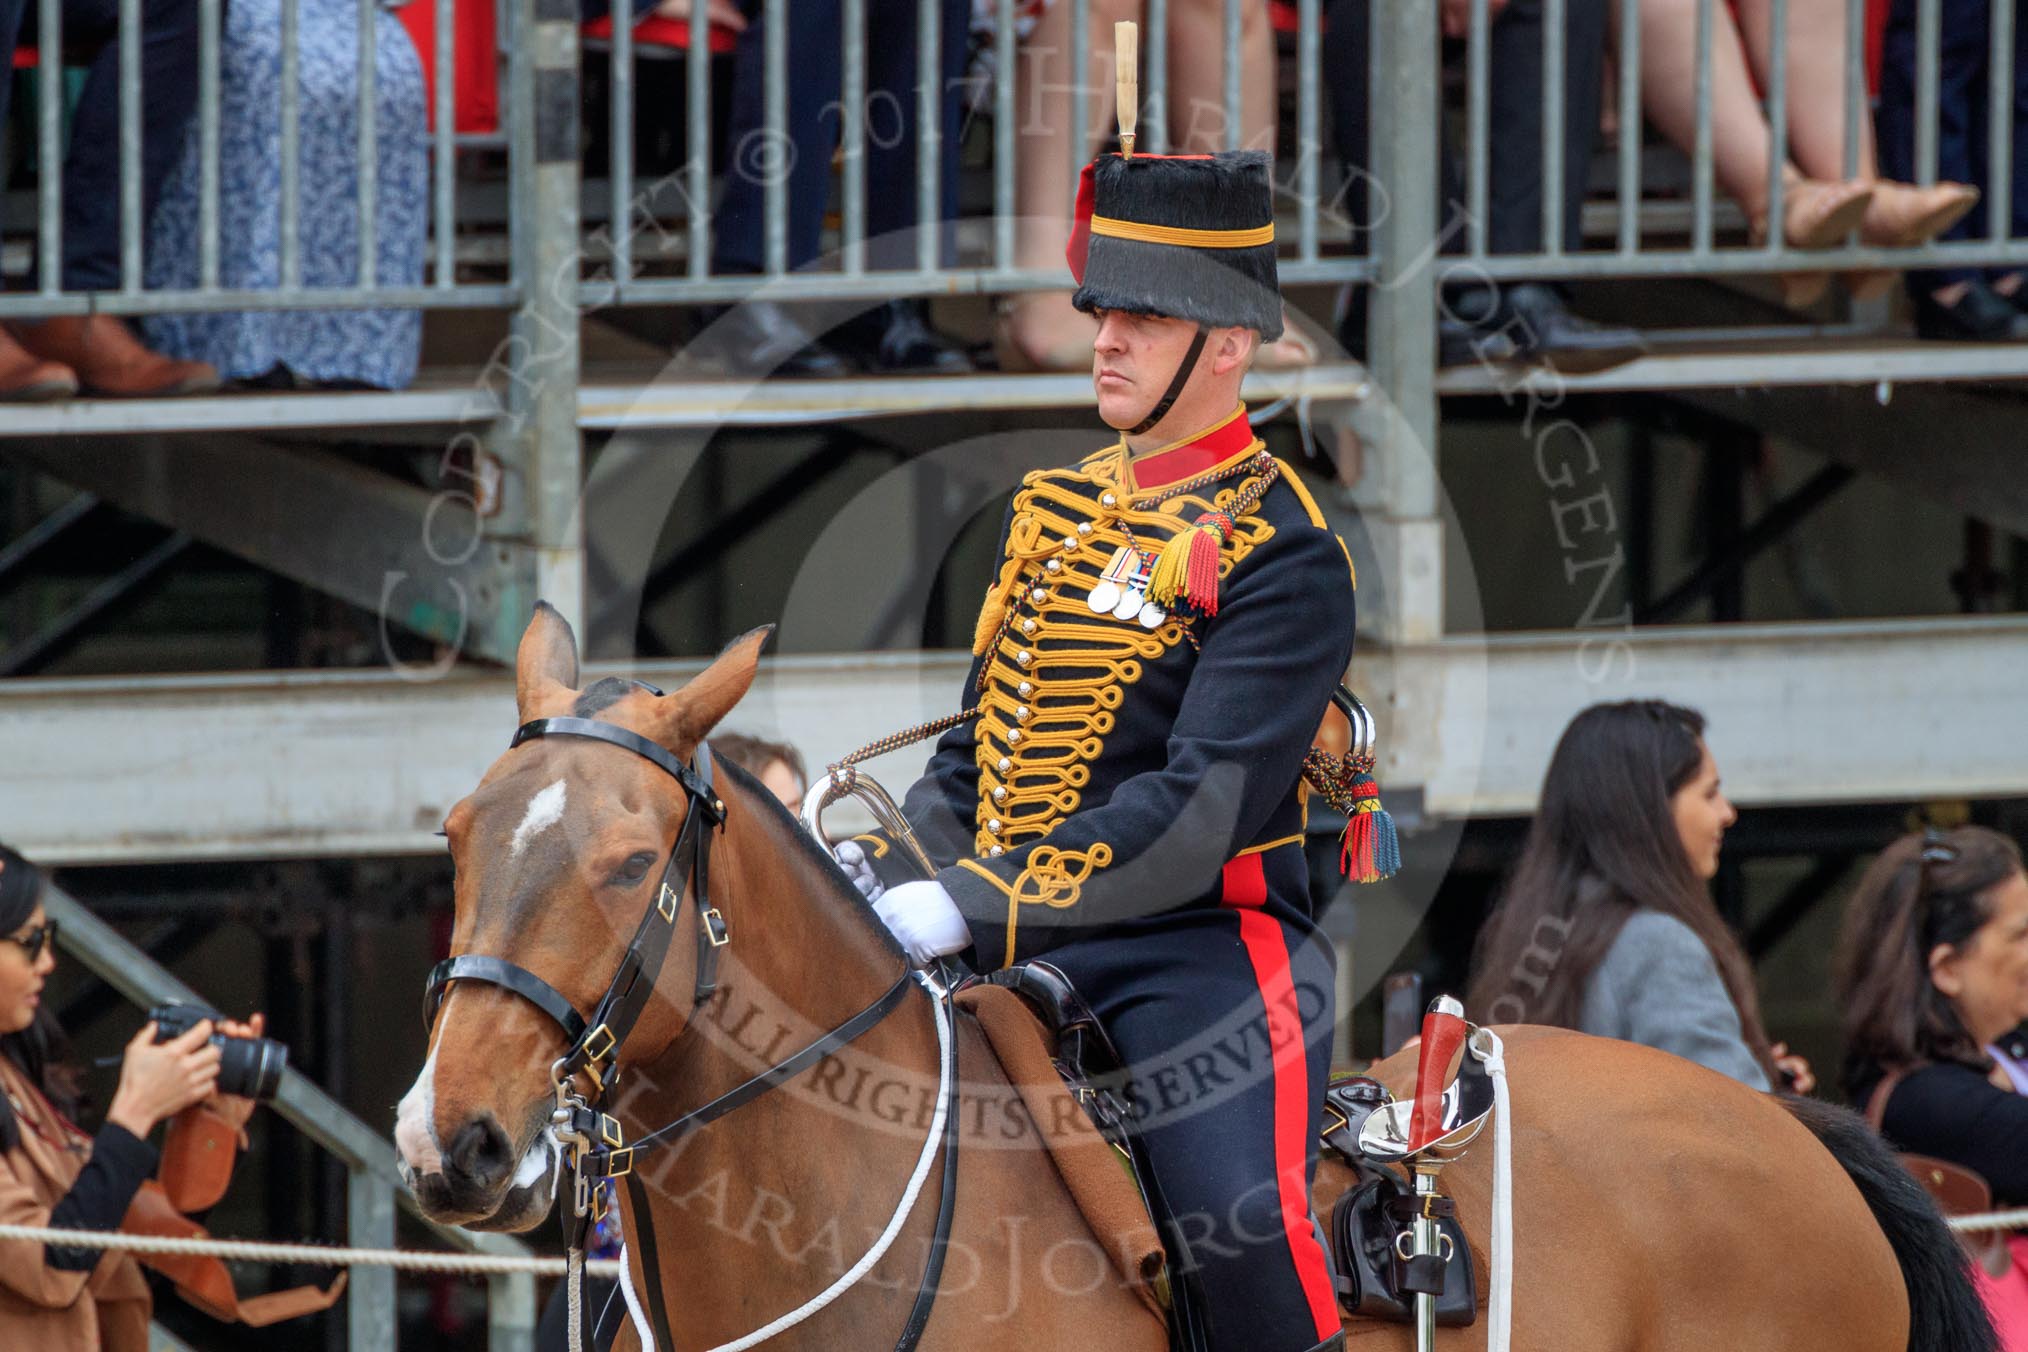 during The Colonel's Review {iptcyear4} (final rehearsal for Trooping the Colour, The Queen's Birthday Parade)  at Horse Guards Parade, Westminster, London, 2 June 2018, 11:56.